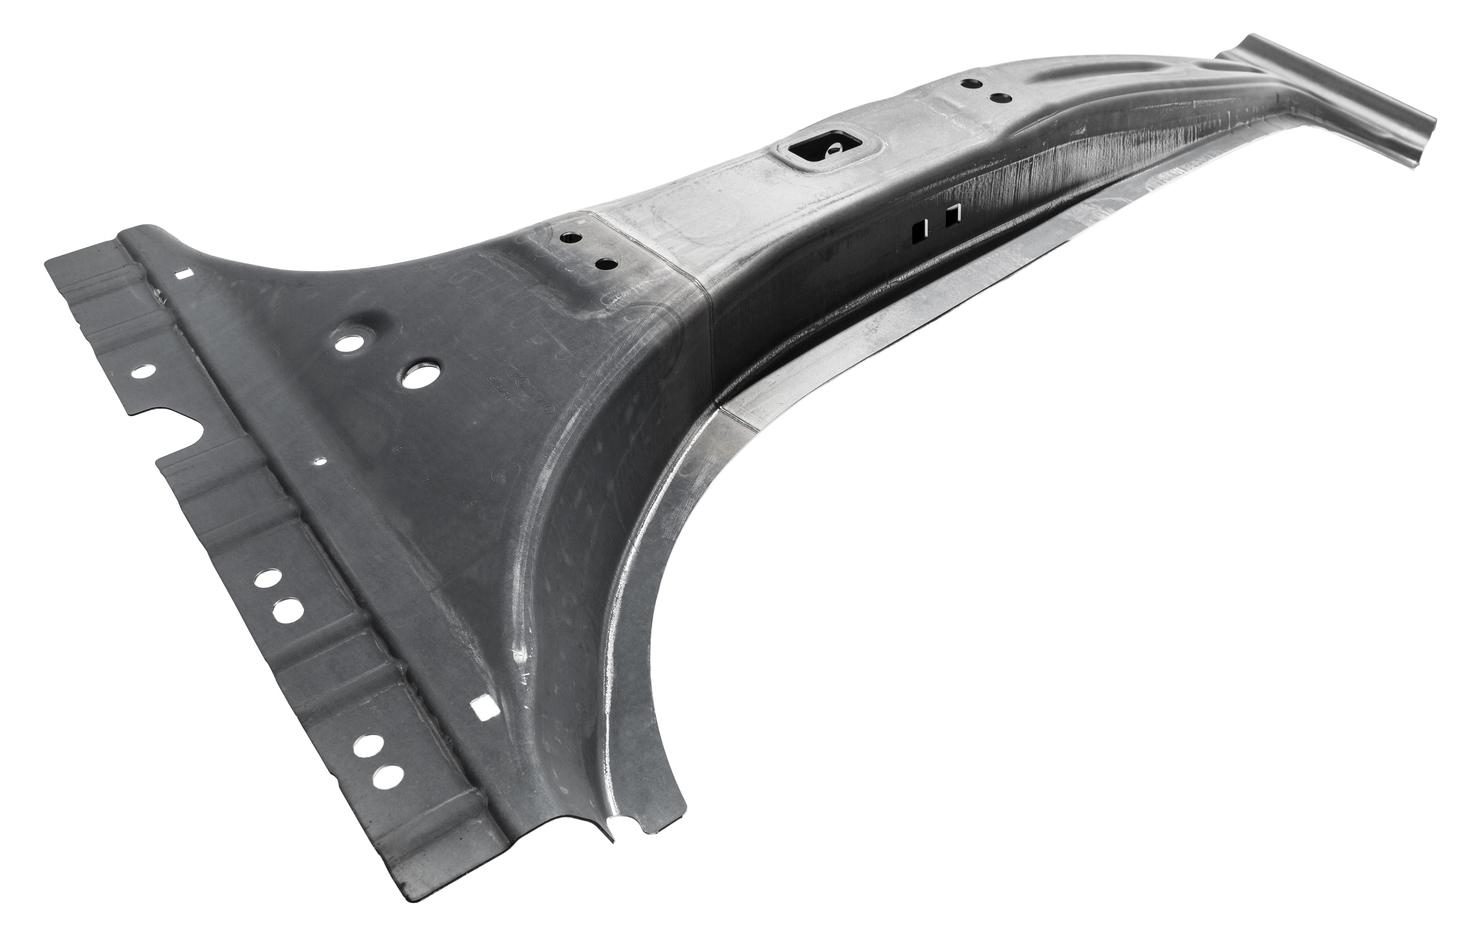 Welded sheet metal with various hardening properties and varying thickness enables customization of collision properties in vehicle parts such as this B-pillar. 